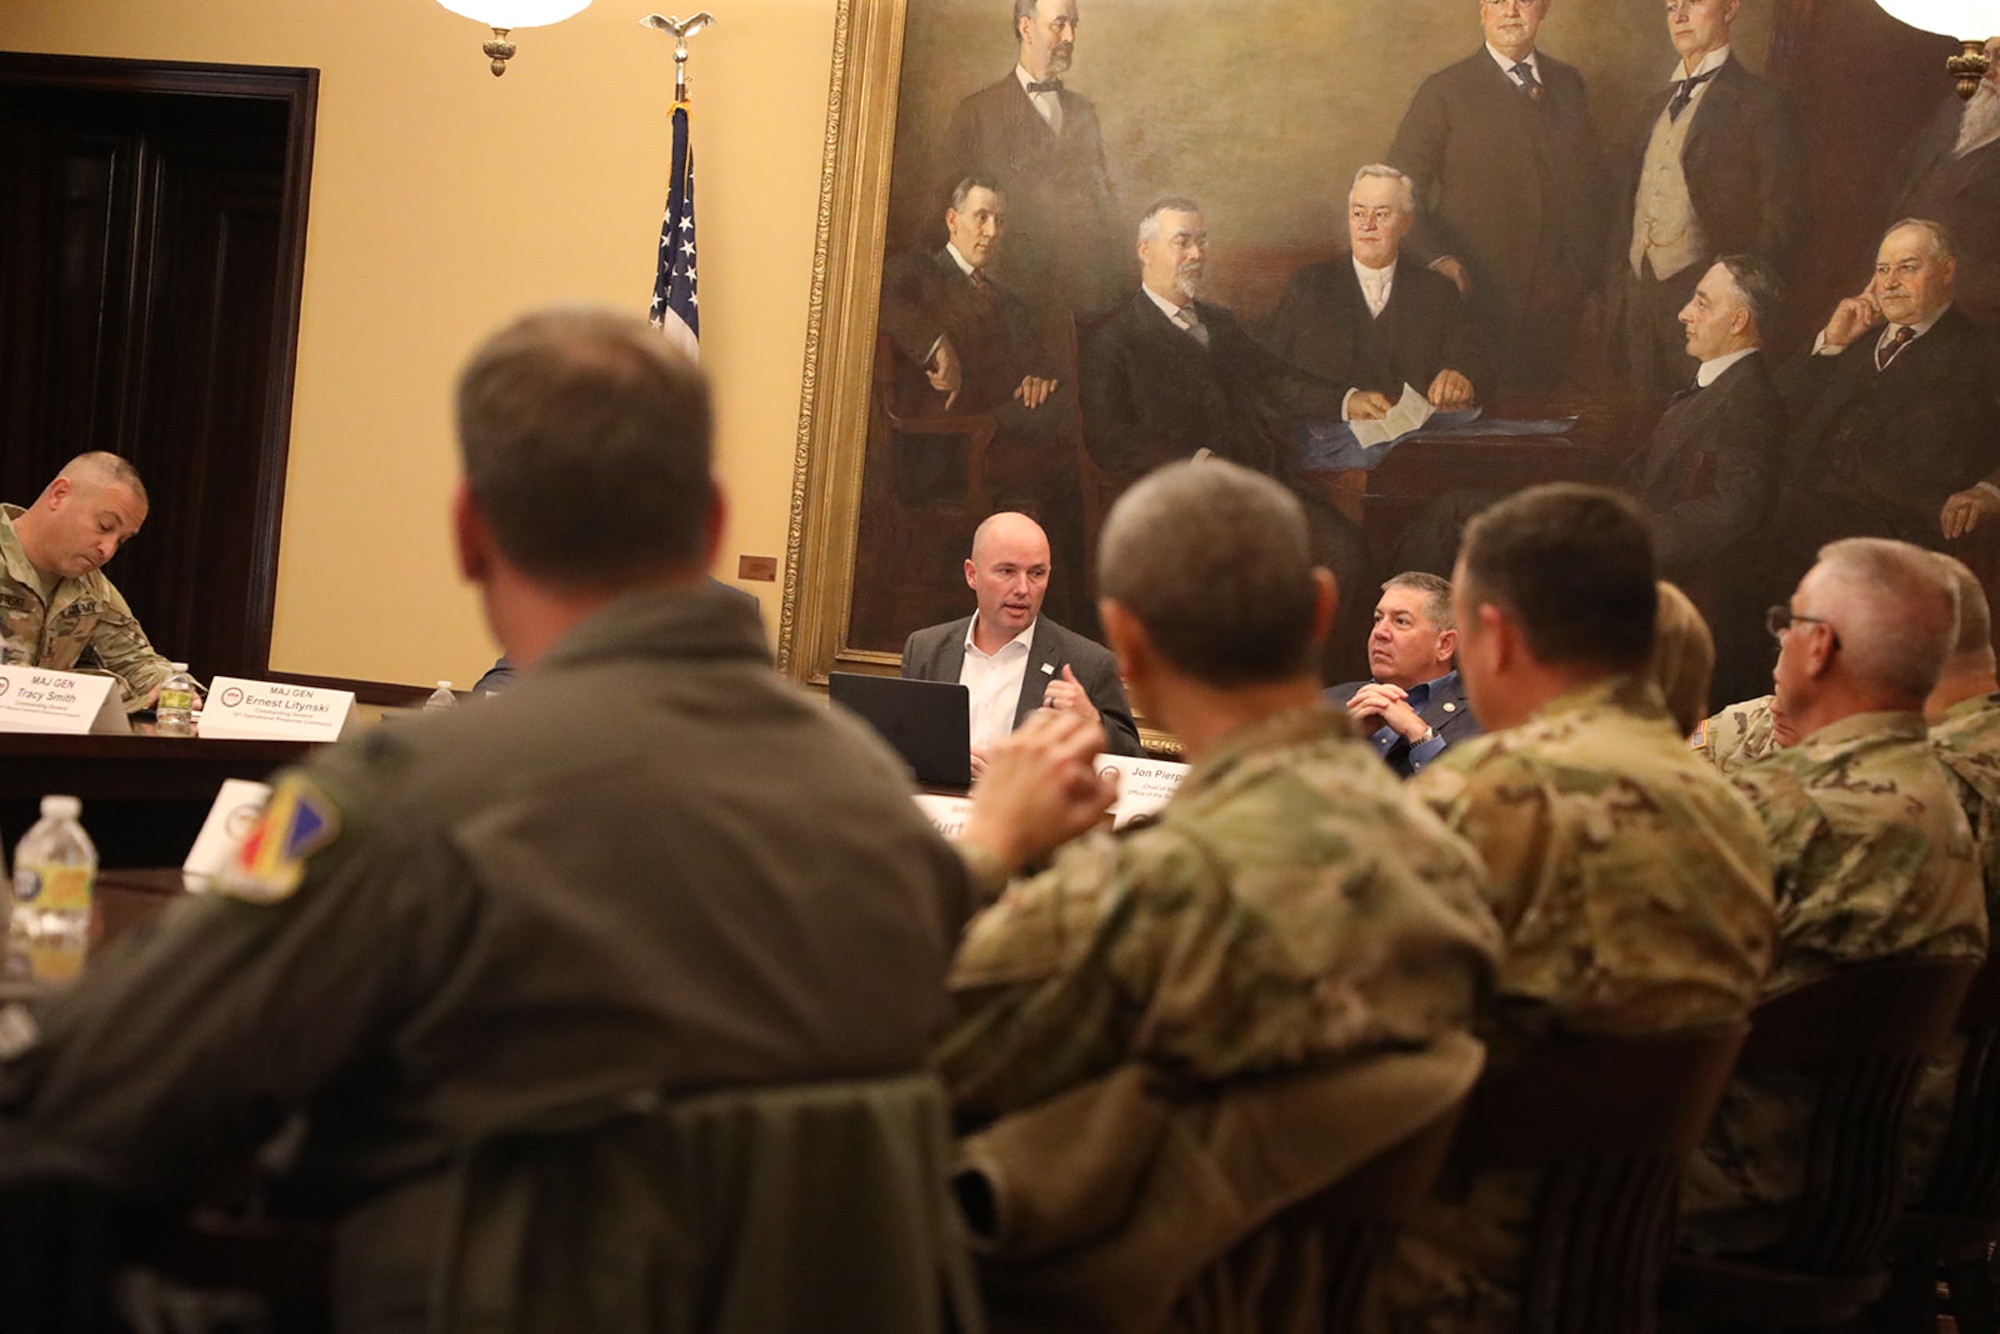 Utah military leaders sit at the roundtable discussion.